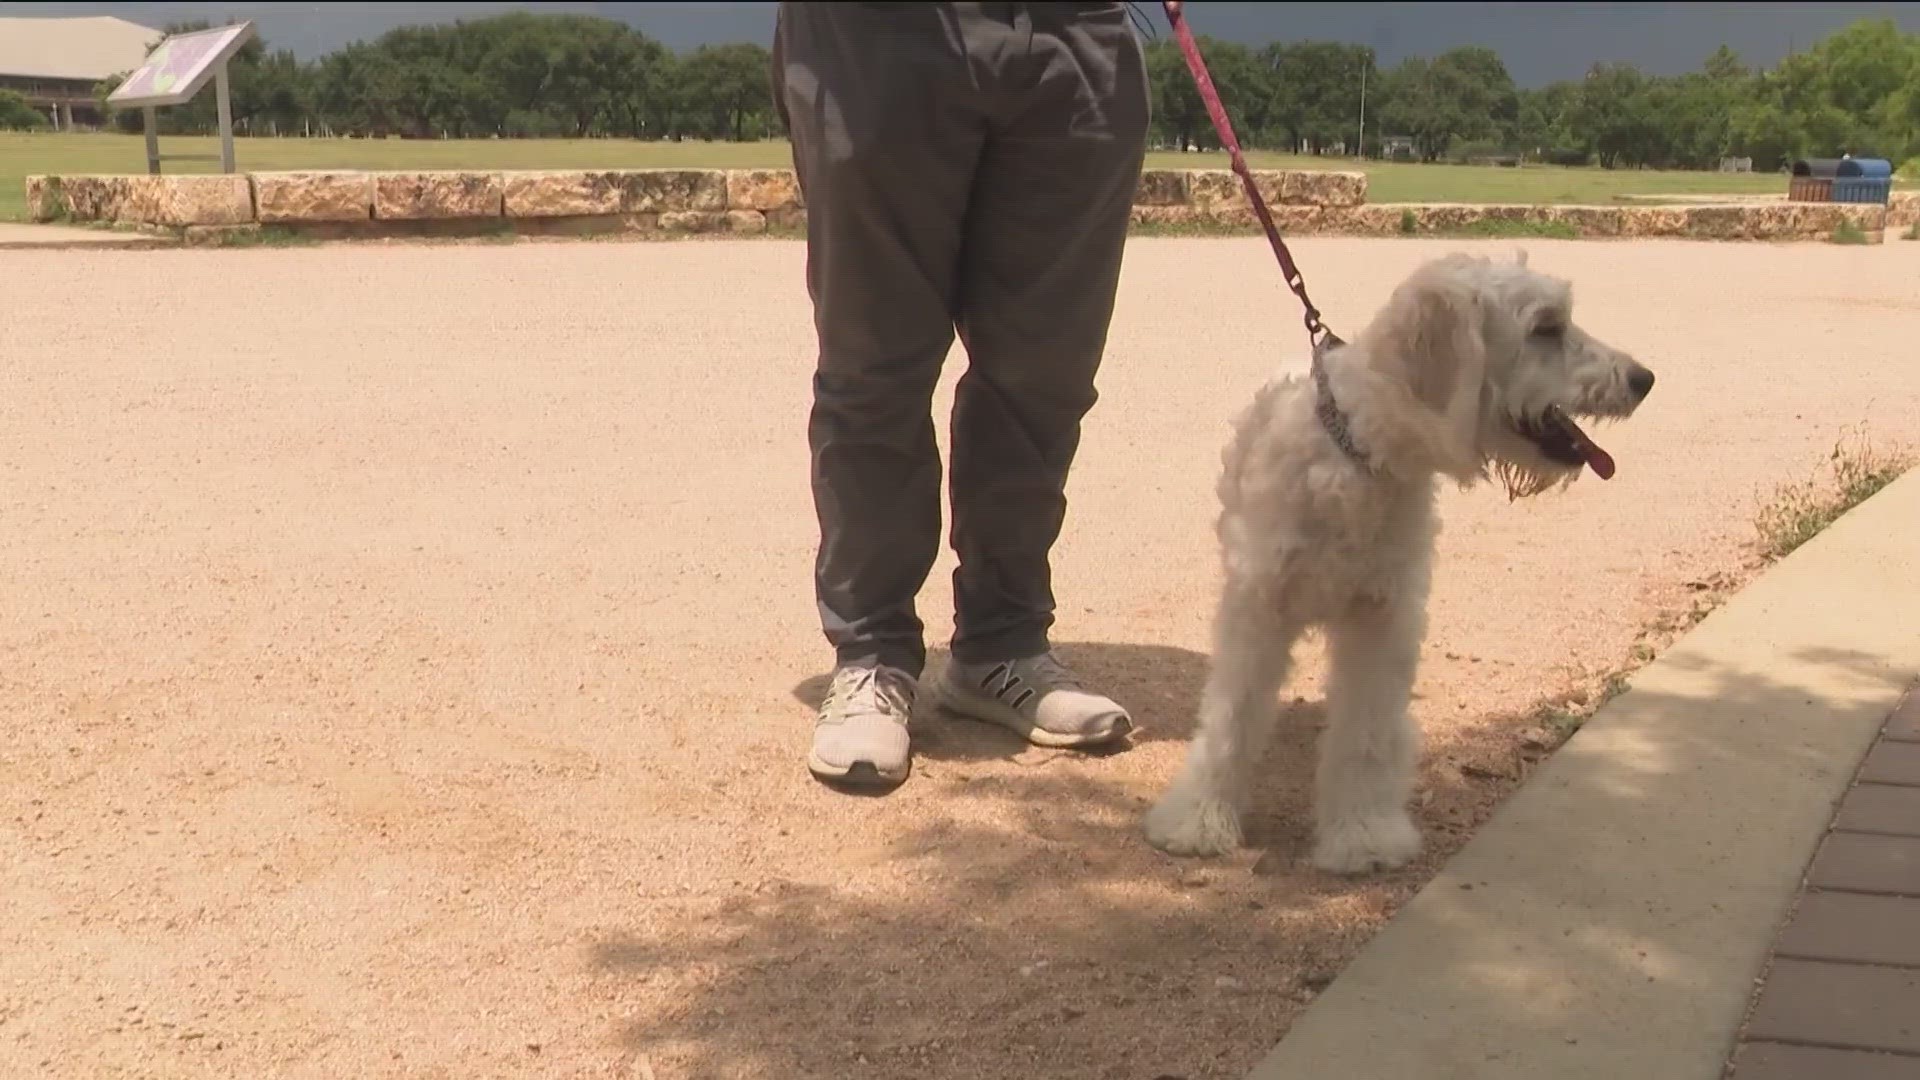 With triple-digit temperatures sticking around, KVUE has some tips on how to keep your animals safe in the summer heat.